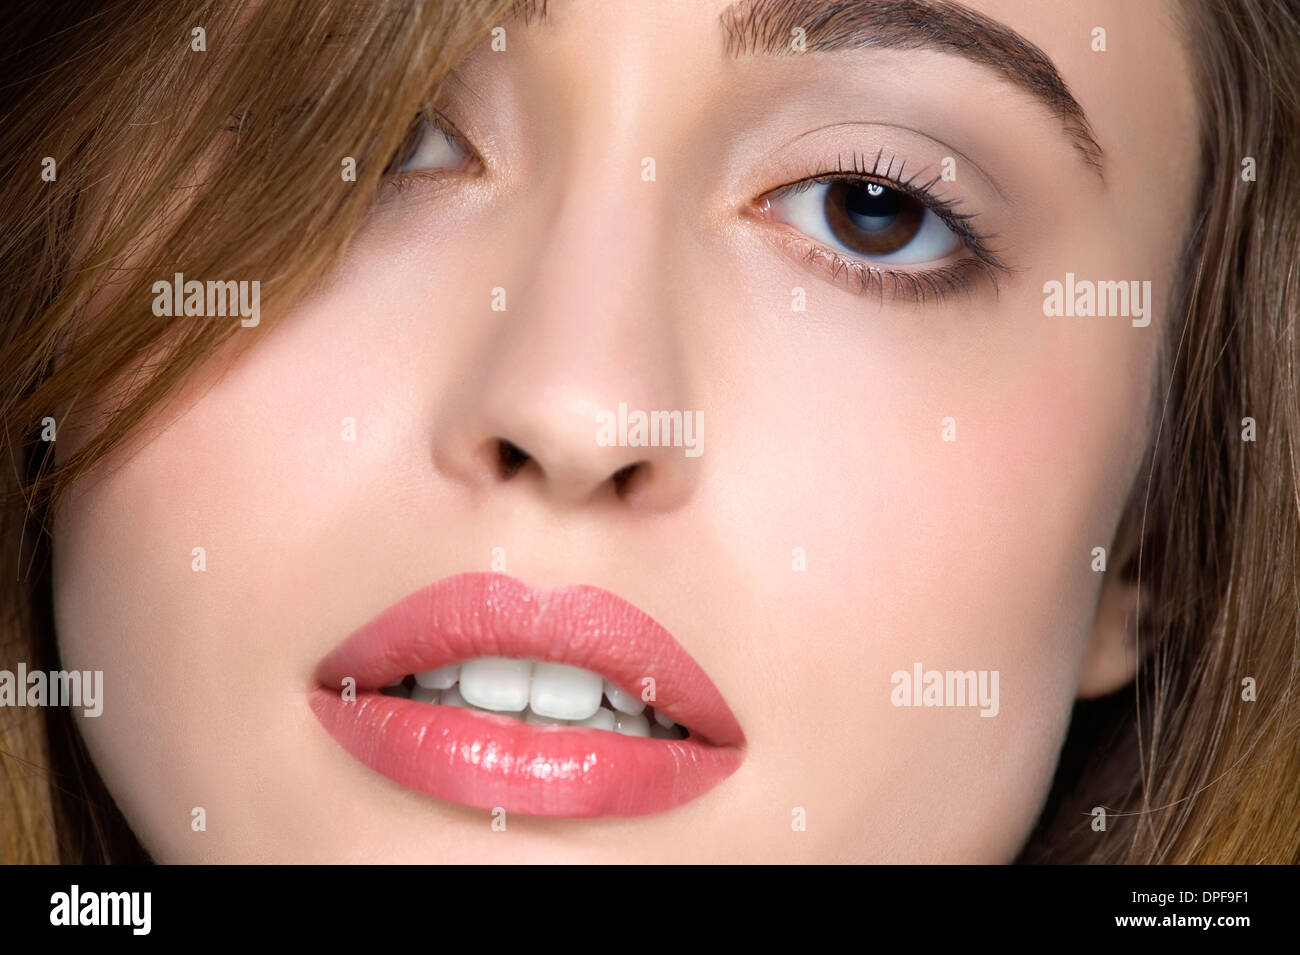 Cropped studio portrait of sensual young woman Stock Photo